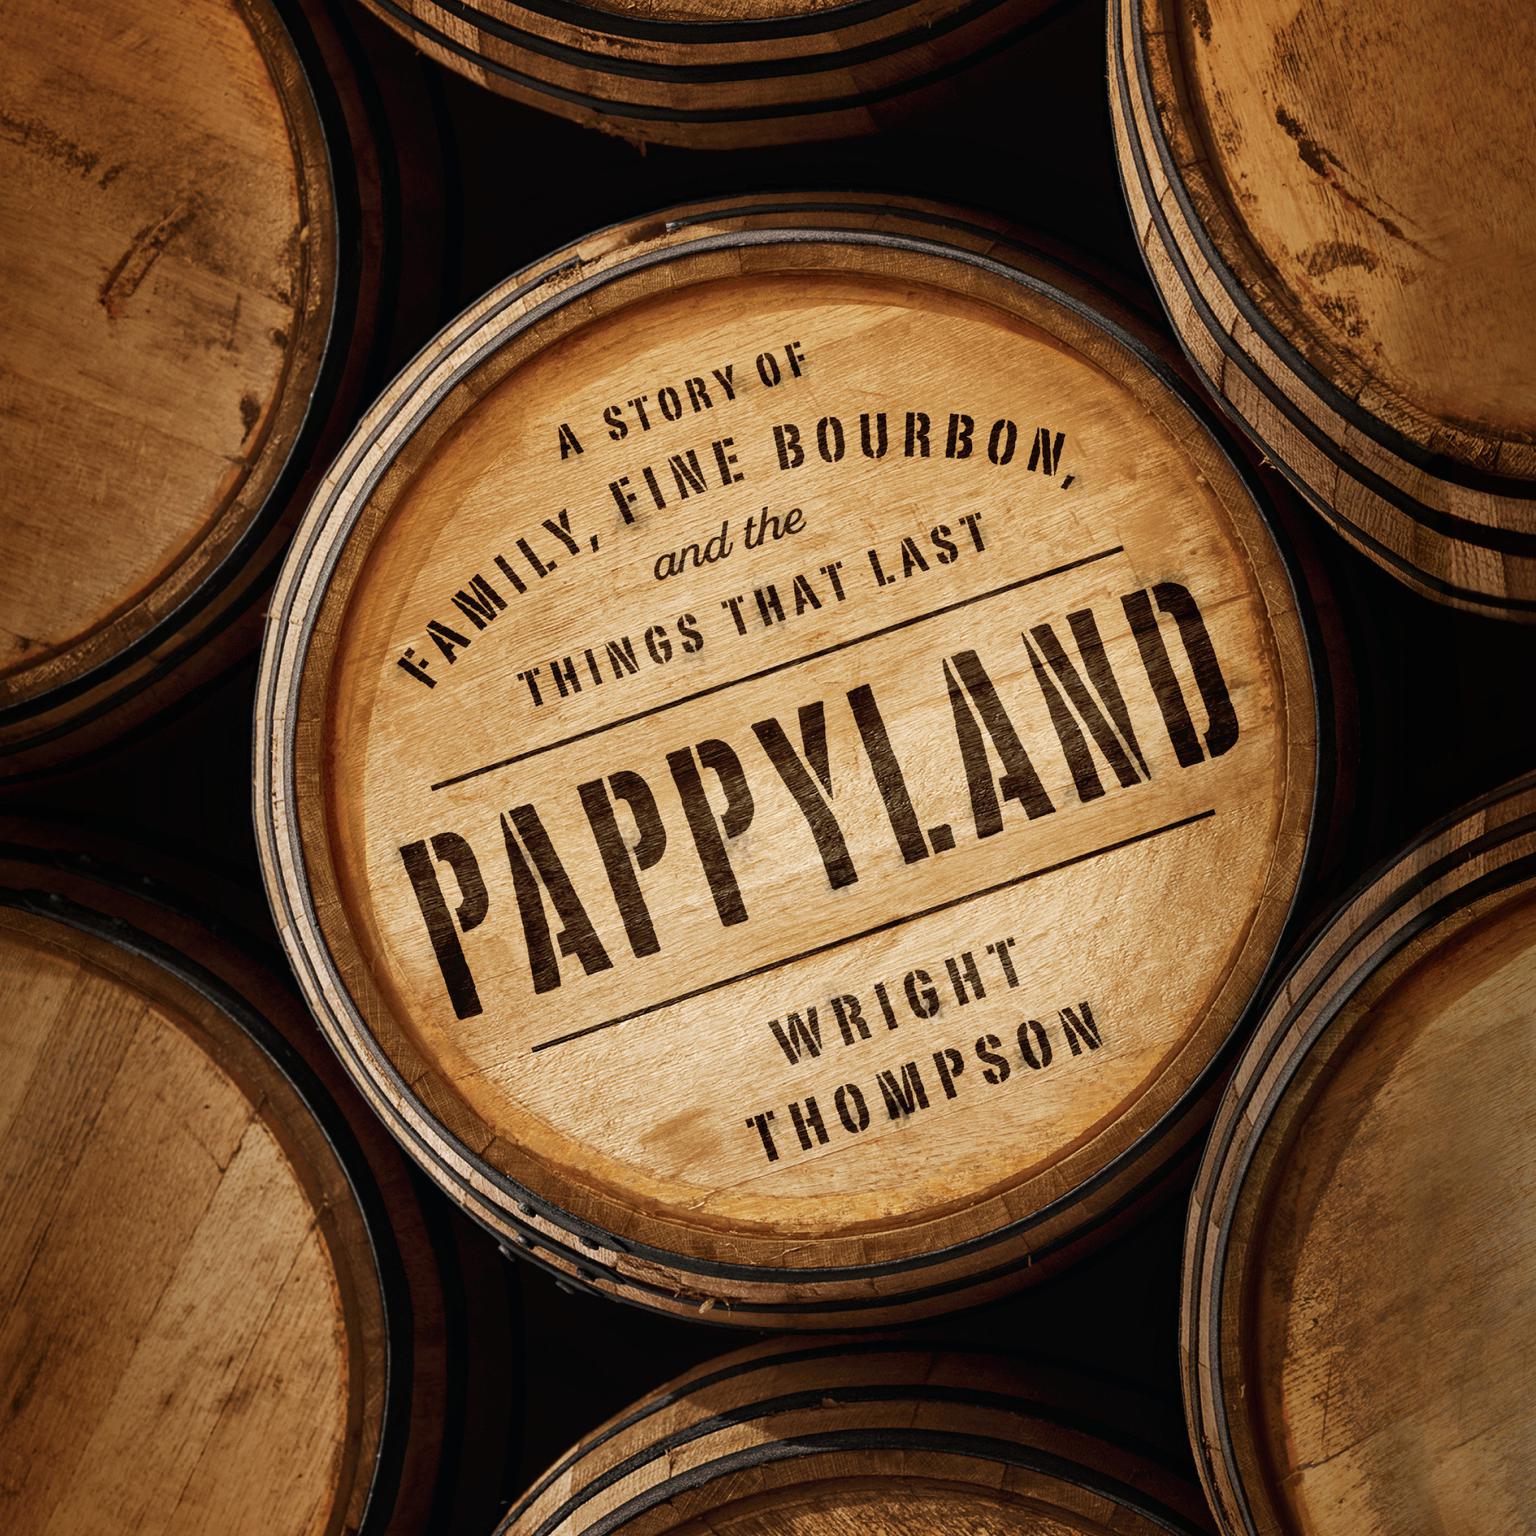 Pappyland: A Story of Family, Fine Bourbon, and the Things That Last Audiobook, by Wright Thompson